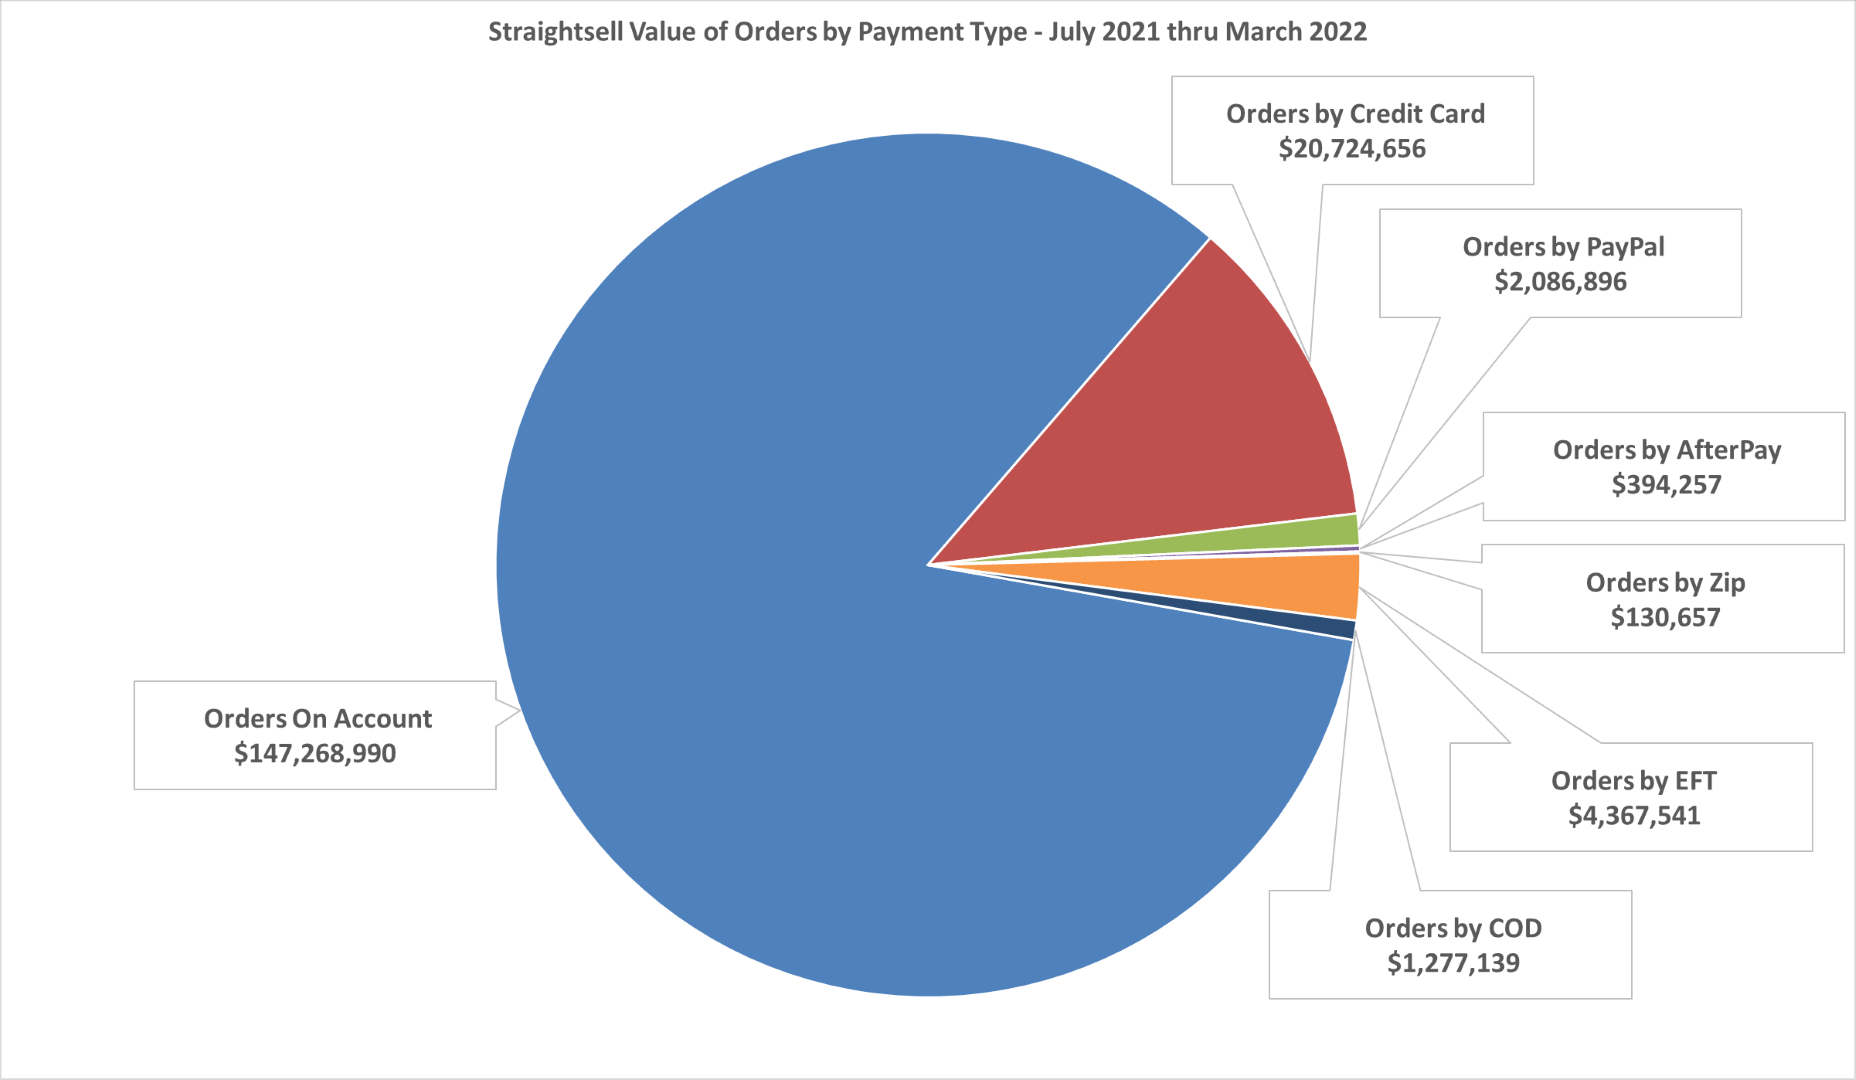 Straightsell Value of Orders by Payment Type - July 2021 thru March 2022